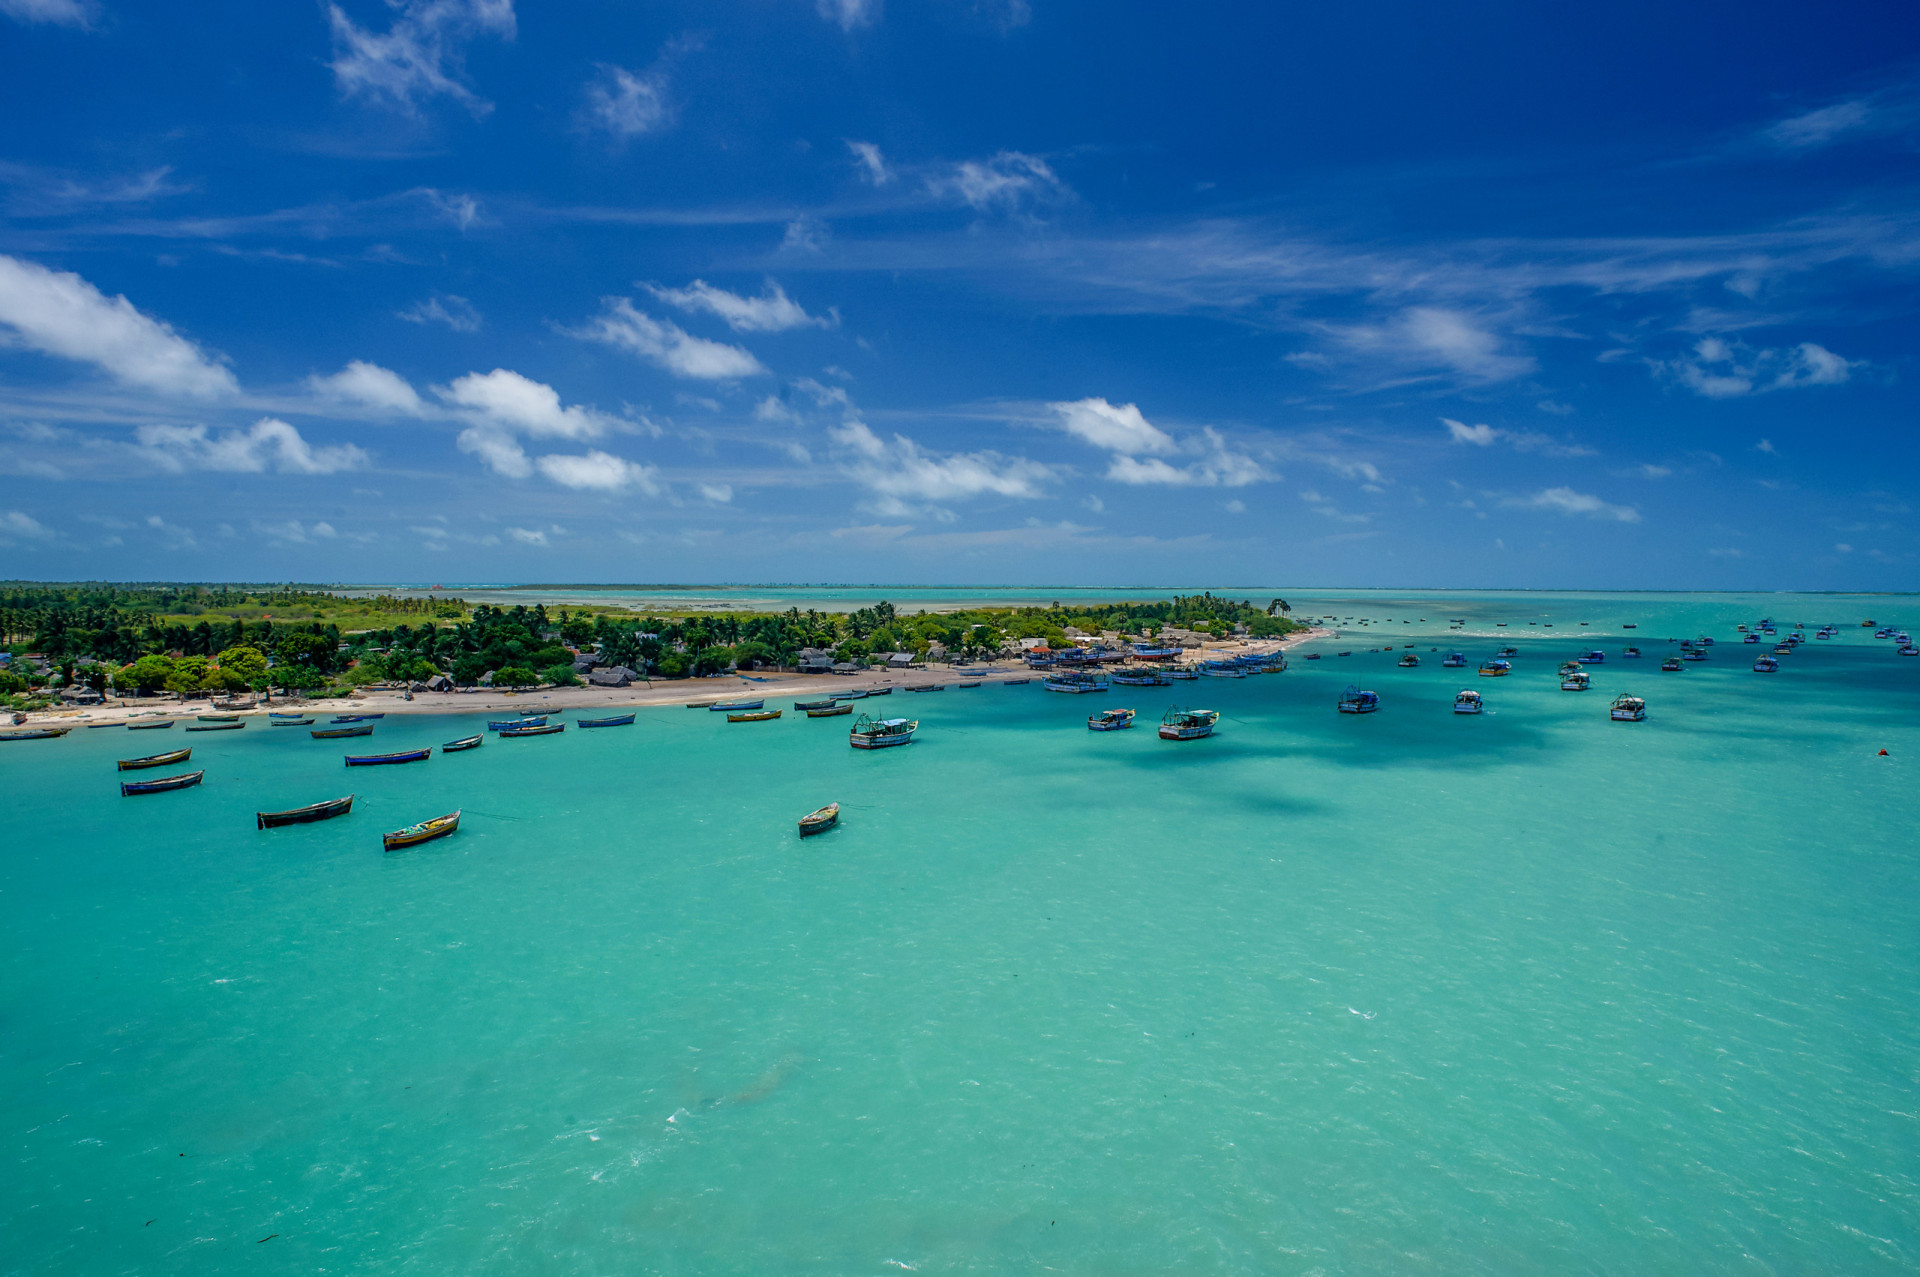 <p>Rameswaram Island, also known as Pamban Island, was originally connected to the mainland by India's first sea bridge, opened in 1914. A new road bridge is set to replace the rail connection to this iconic island, favored for its wealth of beaches and temples.</p><p><a href="https://www.msn.com/en-nz/community/channel/vid-7xx8mnucu55yw63we9va2gwr7uihbxwc68fxqp25x6tg4ftibpra?cvid=94631541bc0f4f89bfd59158d696ad7e">Follow us and access great exclusive content every day</a></p>